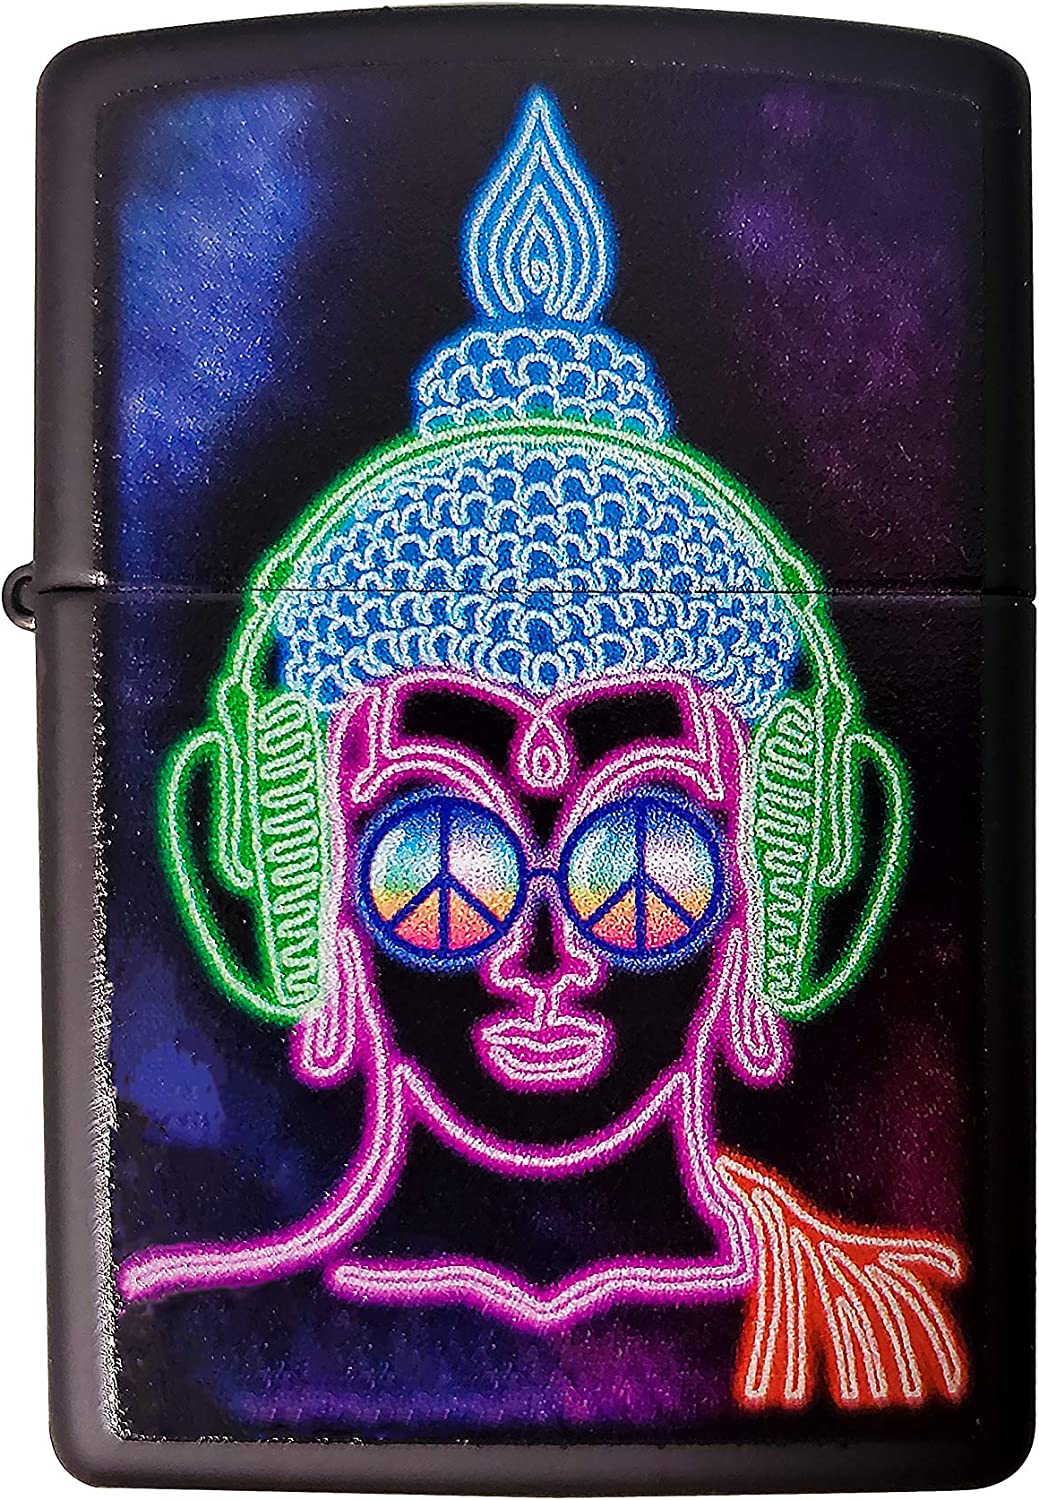 Chill Space Galaxy Headphones Neon Buddha with Peace Signs - Black Matte Zippo Lighter